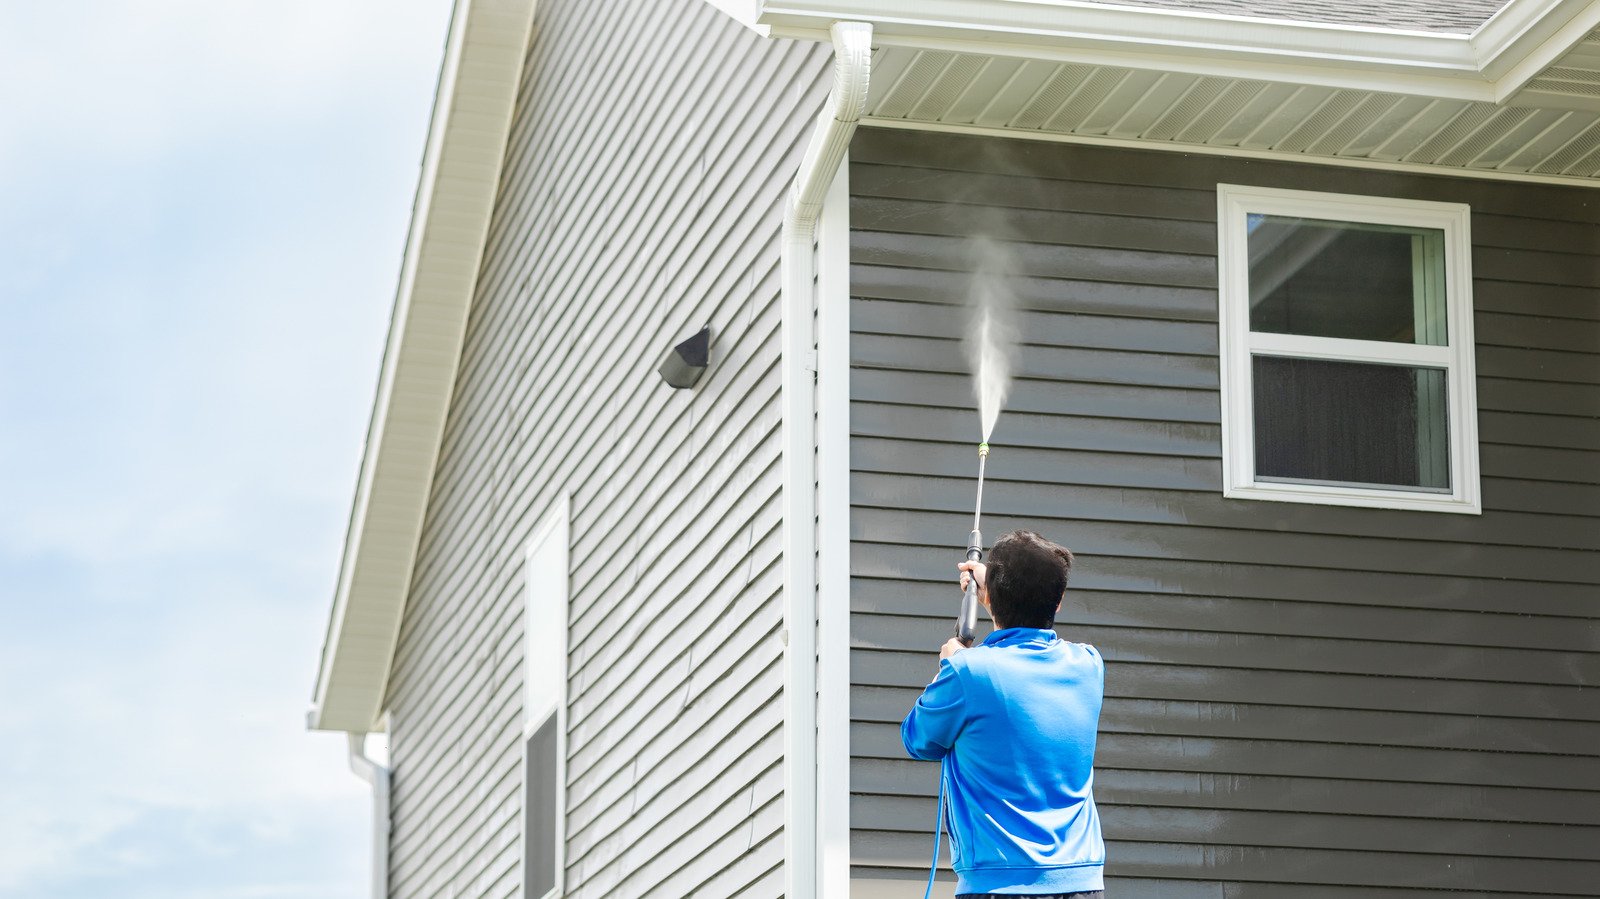 3 Areas In Your Home You Should Avoid Pressure Washing - House Digest